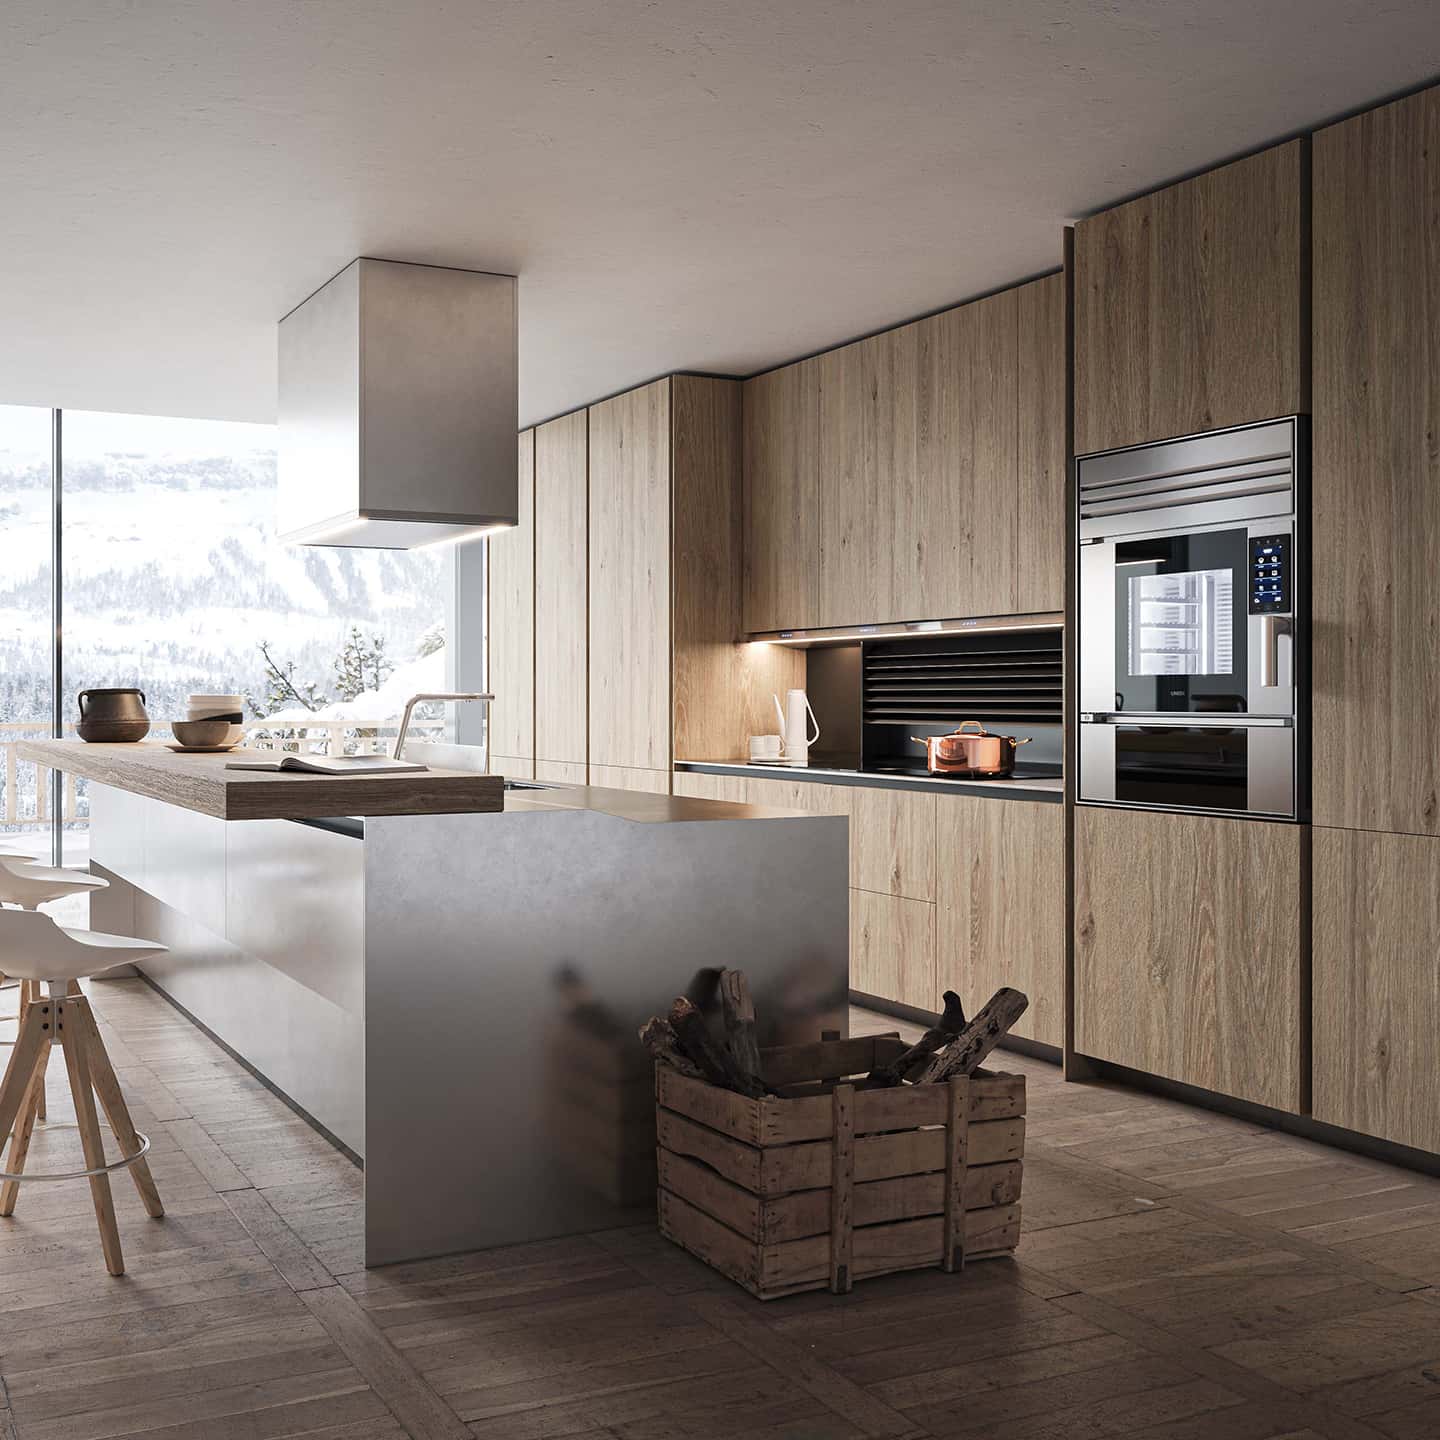 Unox Casa's built-in ovens in a luxury kitchen of a mountain chalet in Cortina D'Ampezzo